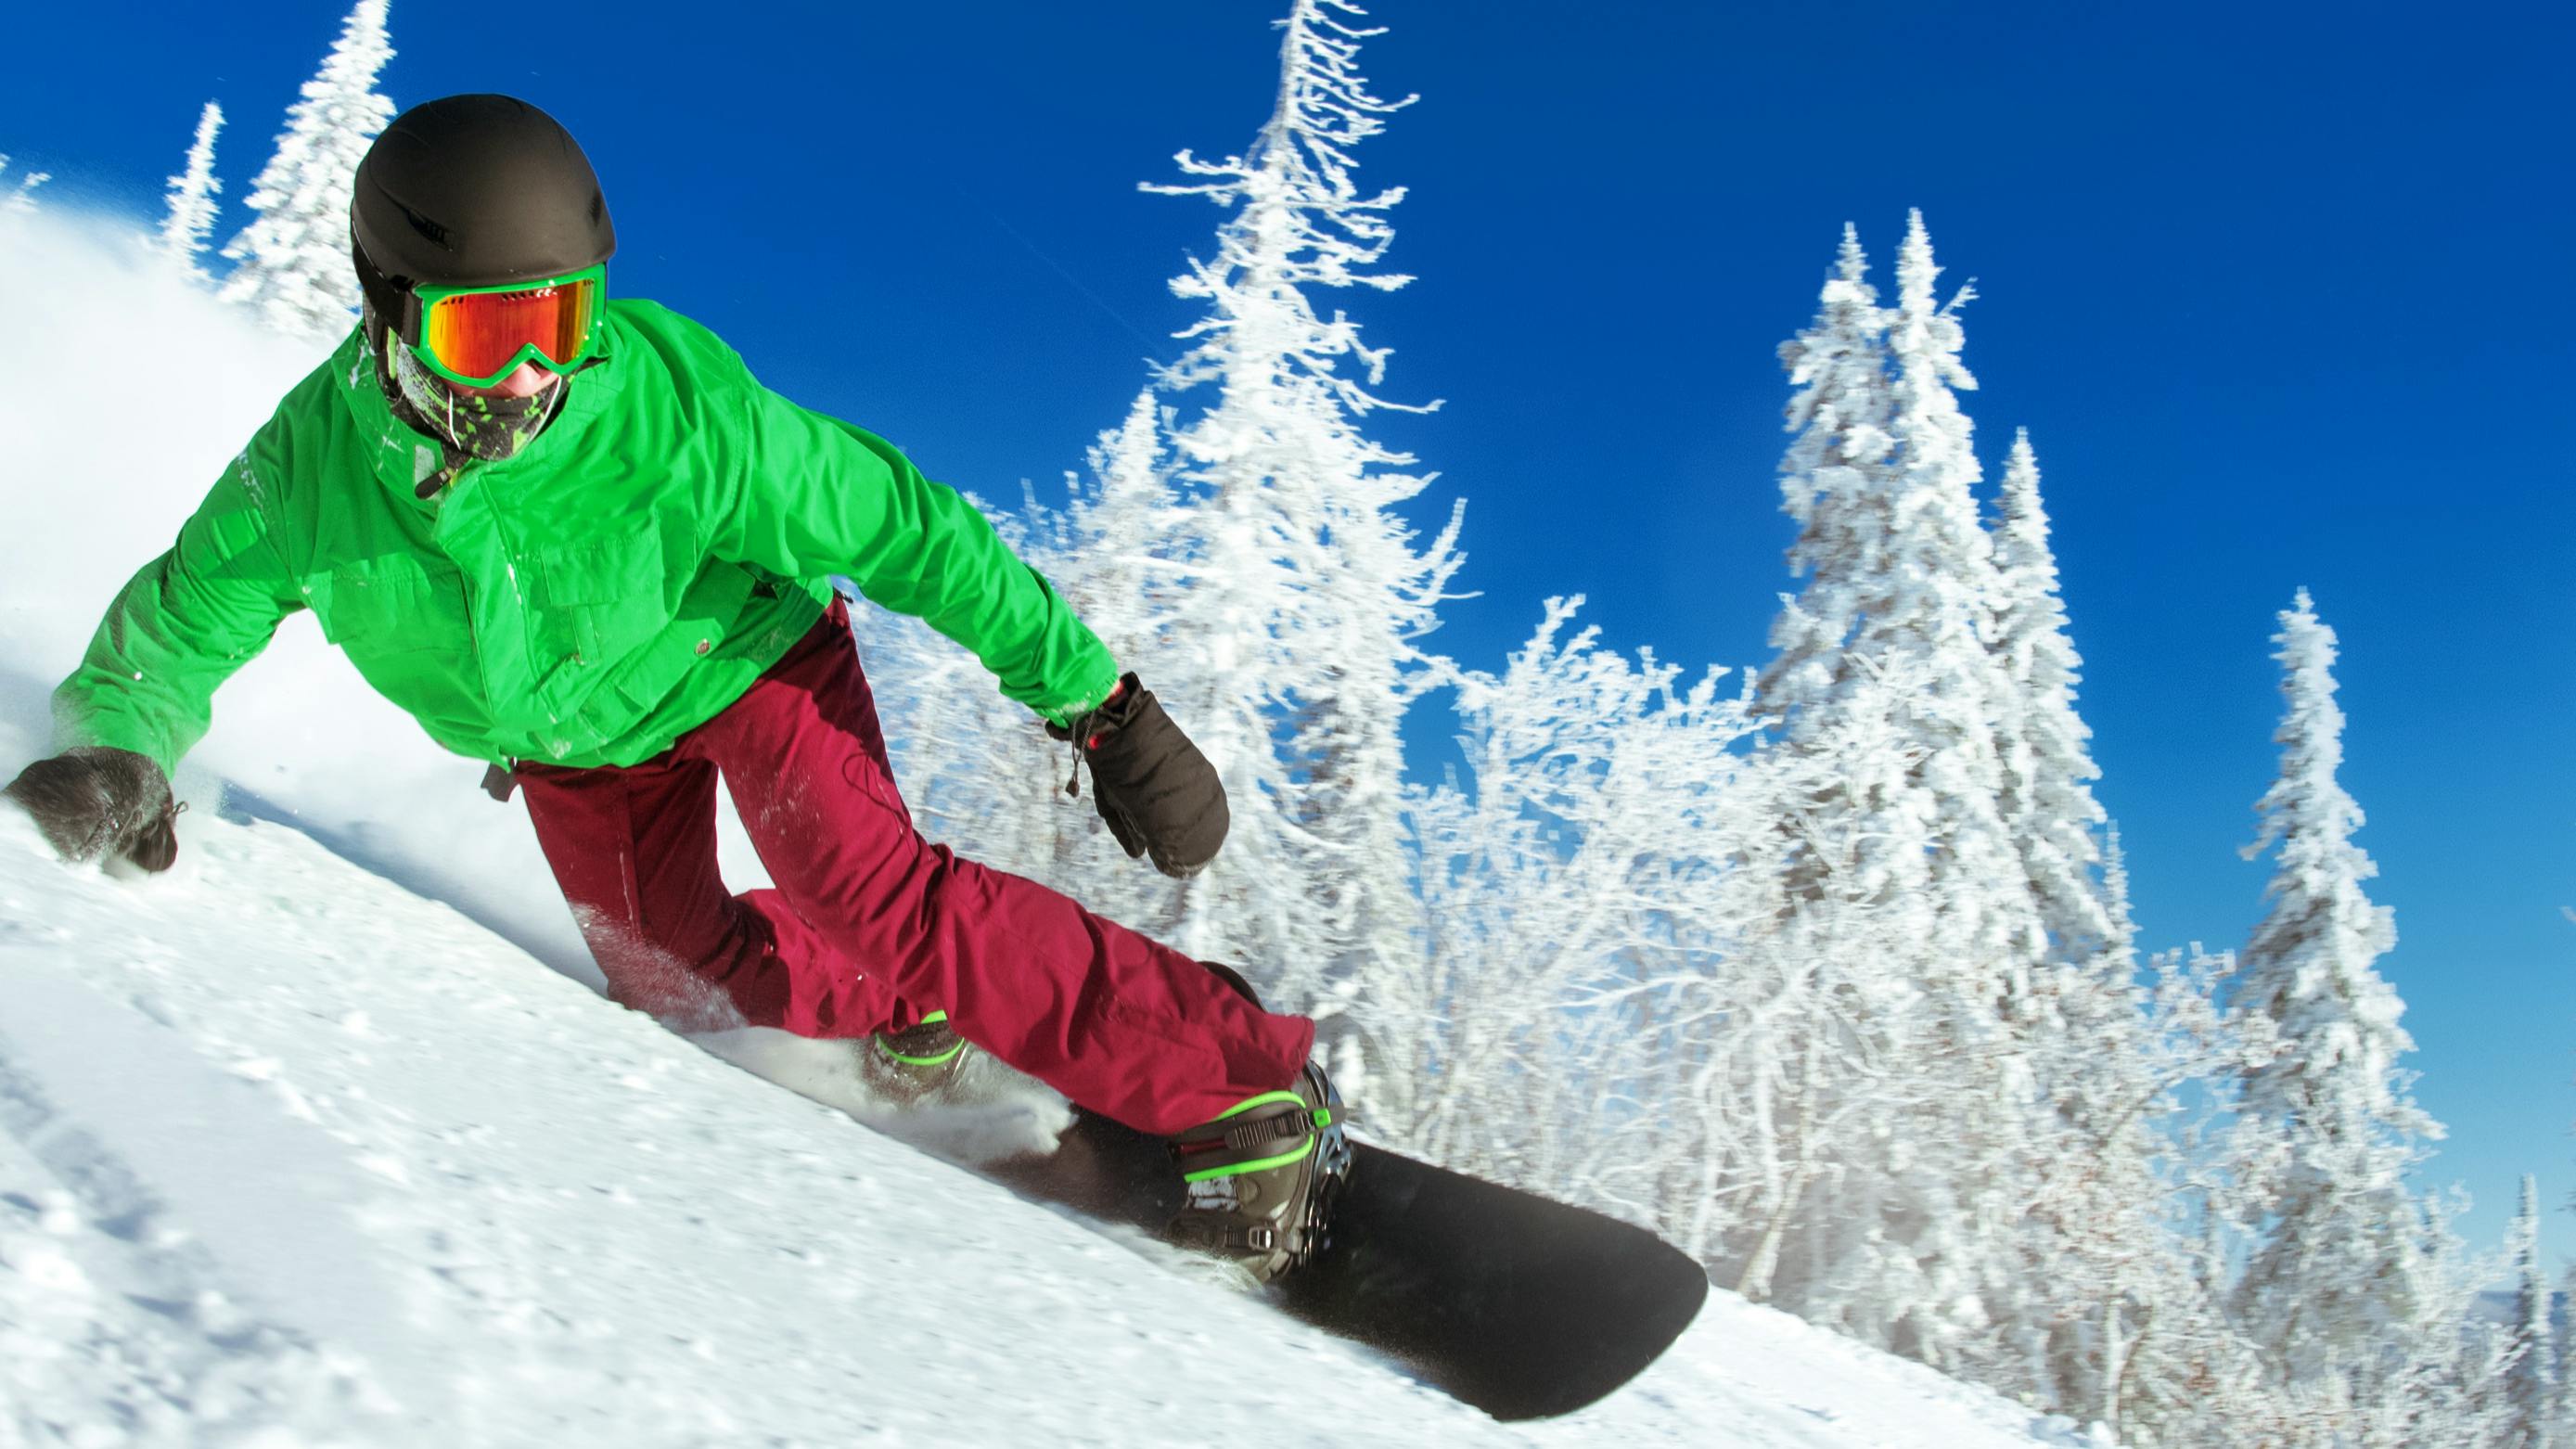 A snowboarder carving down a ski run in red pants and a green jacket. 